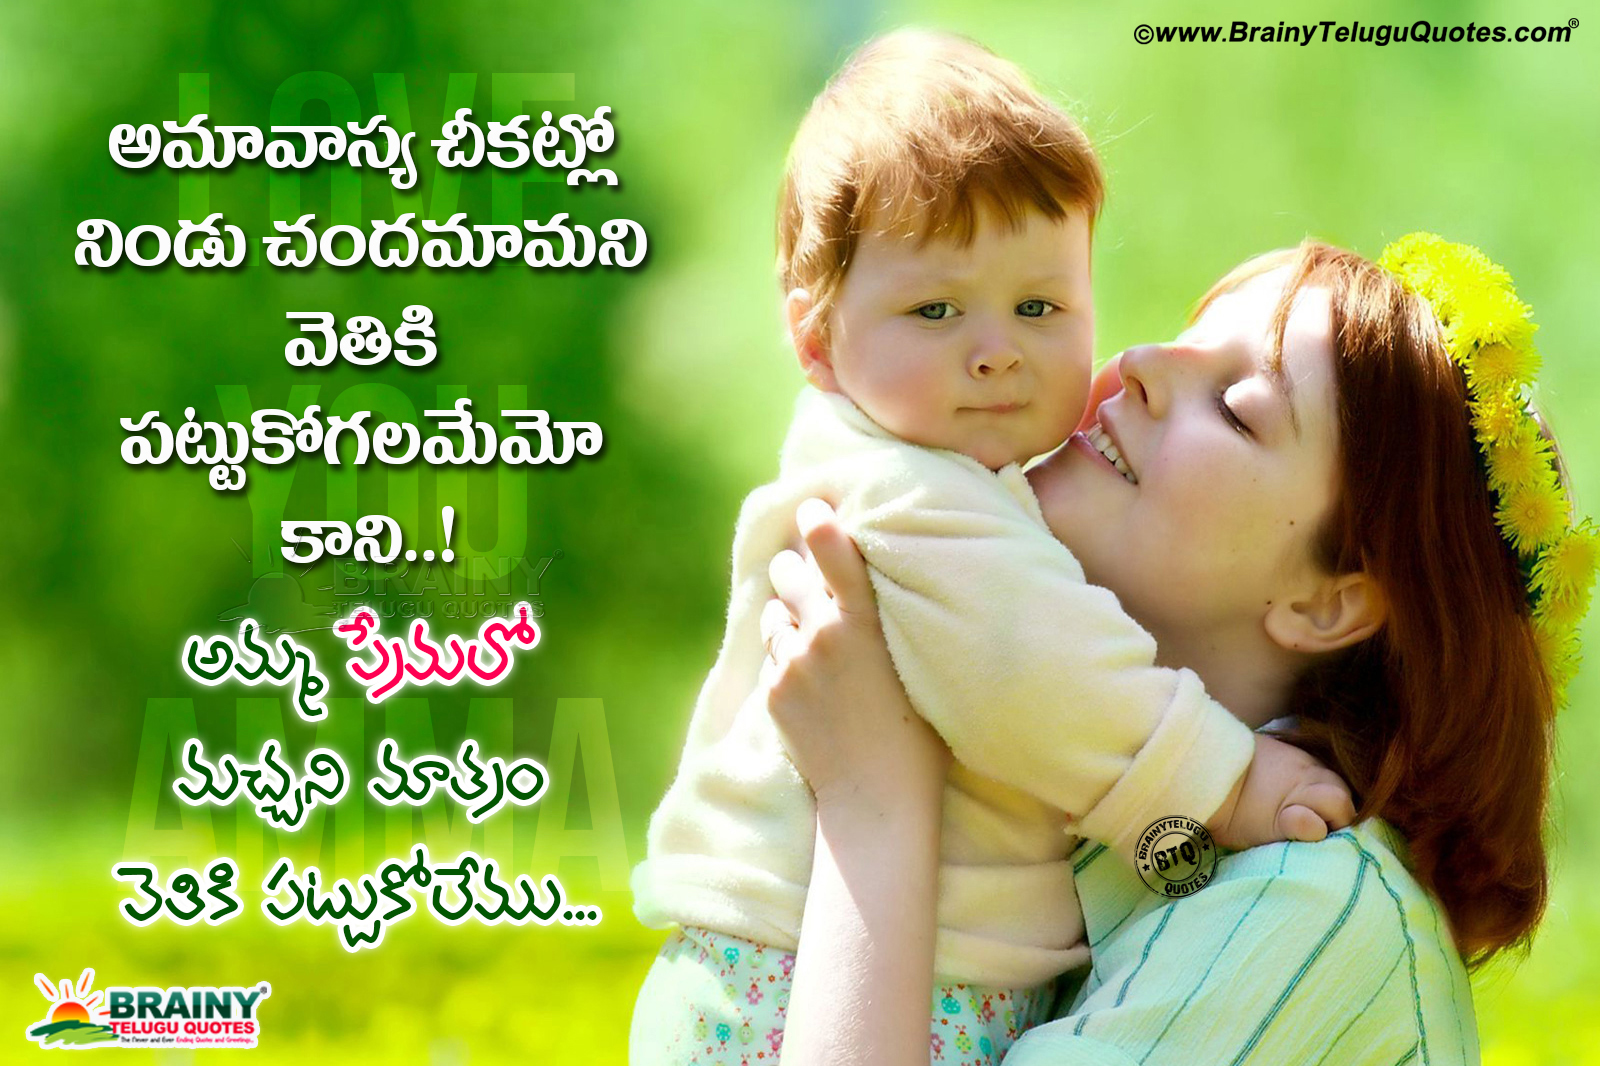 Mother Quotes and Images Telugu Information and Suktulu with HD Wallpapers  | JNANA KADALI.COM |Telugu Quotes|English quotes|Hindi quotes|Tamil  quotes|Dharmasandehalu|